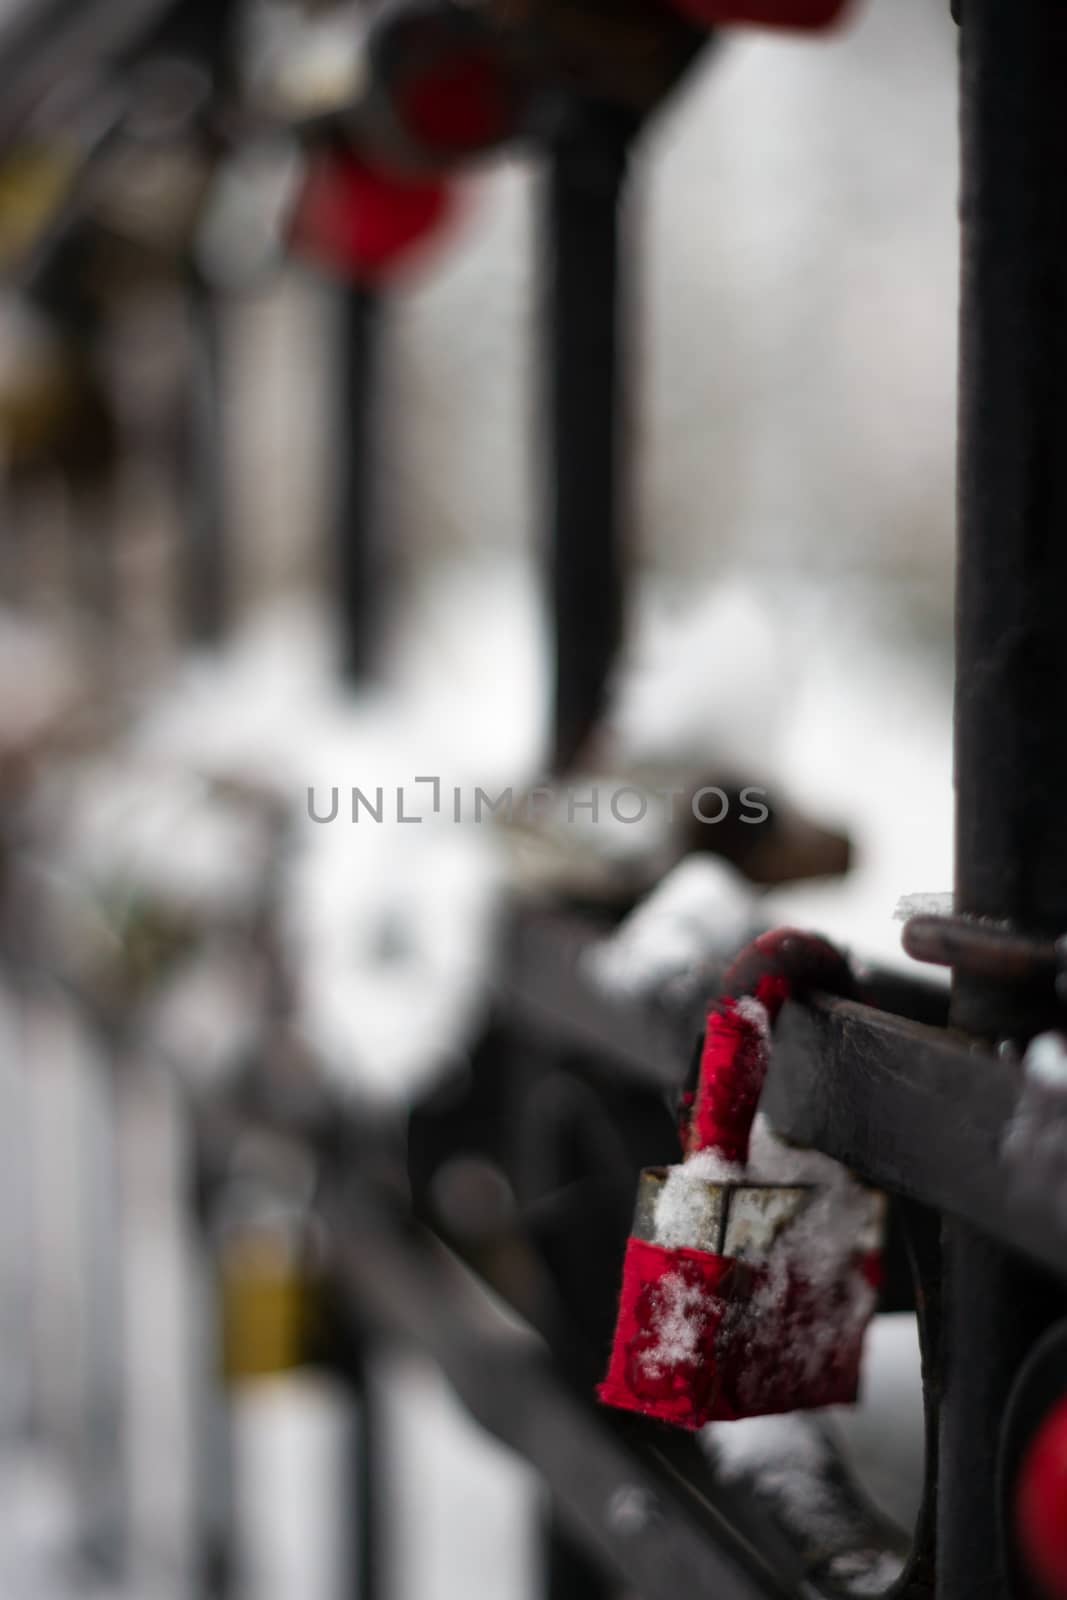 Padlocks on a fence in park. Winter time, romantic place in park. Closeup view with blurred background.